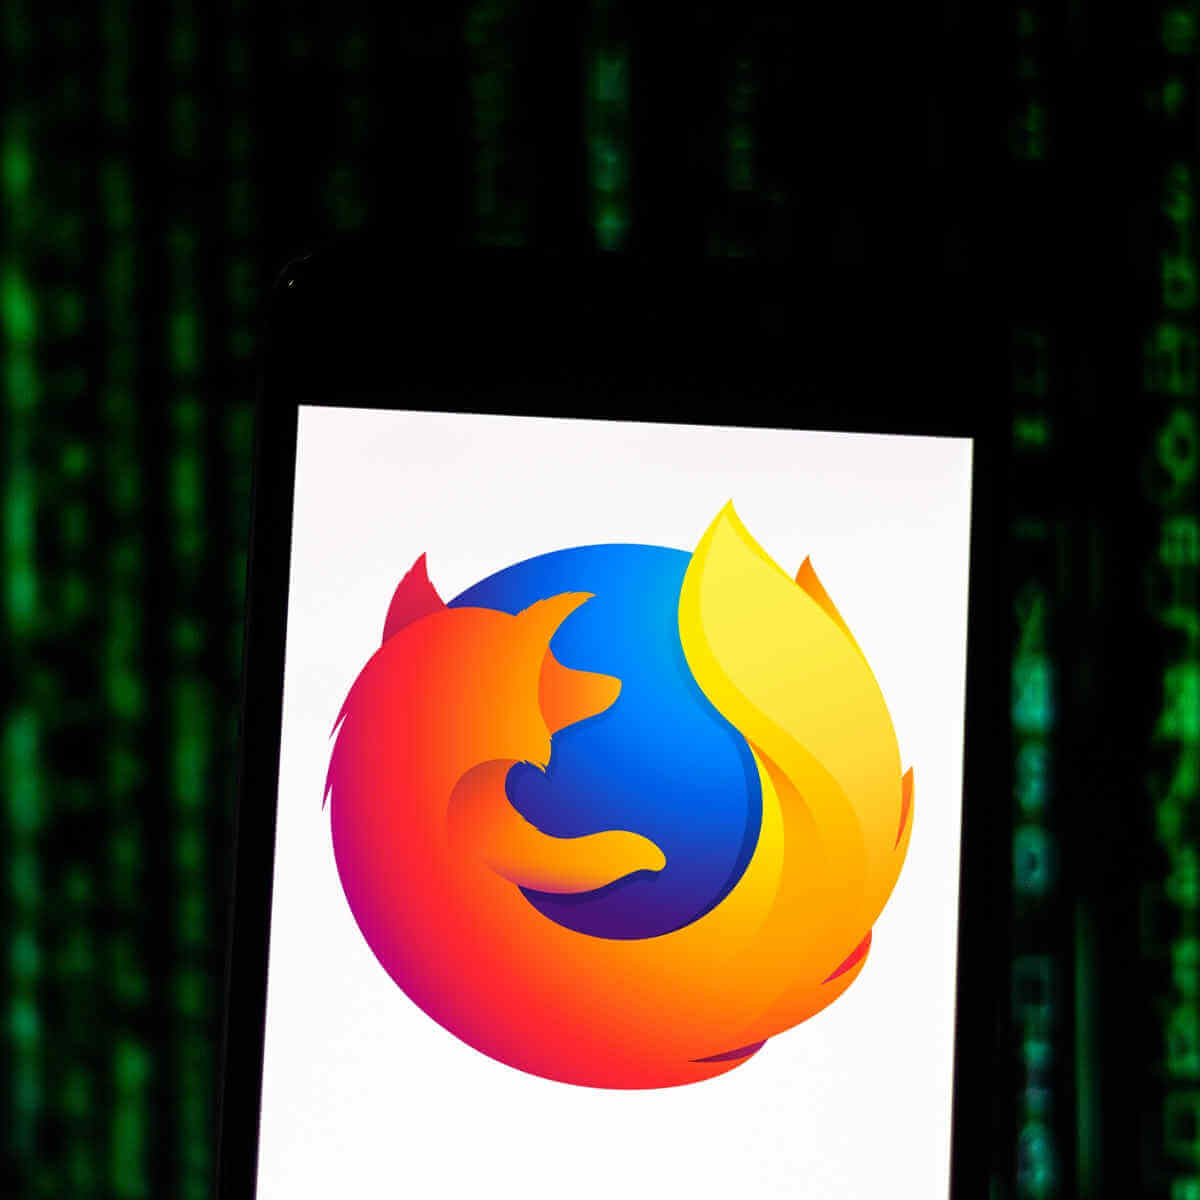 Firefox 77 rollout